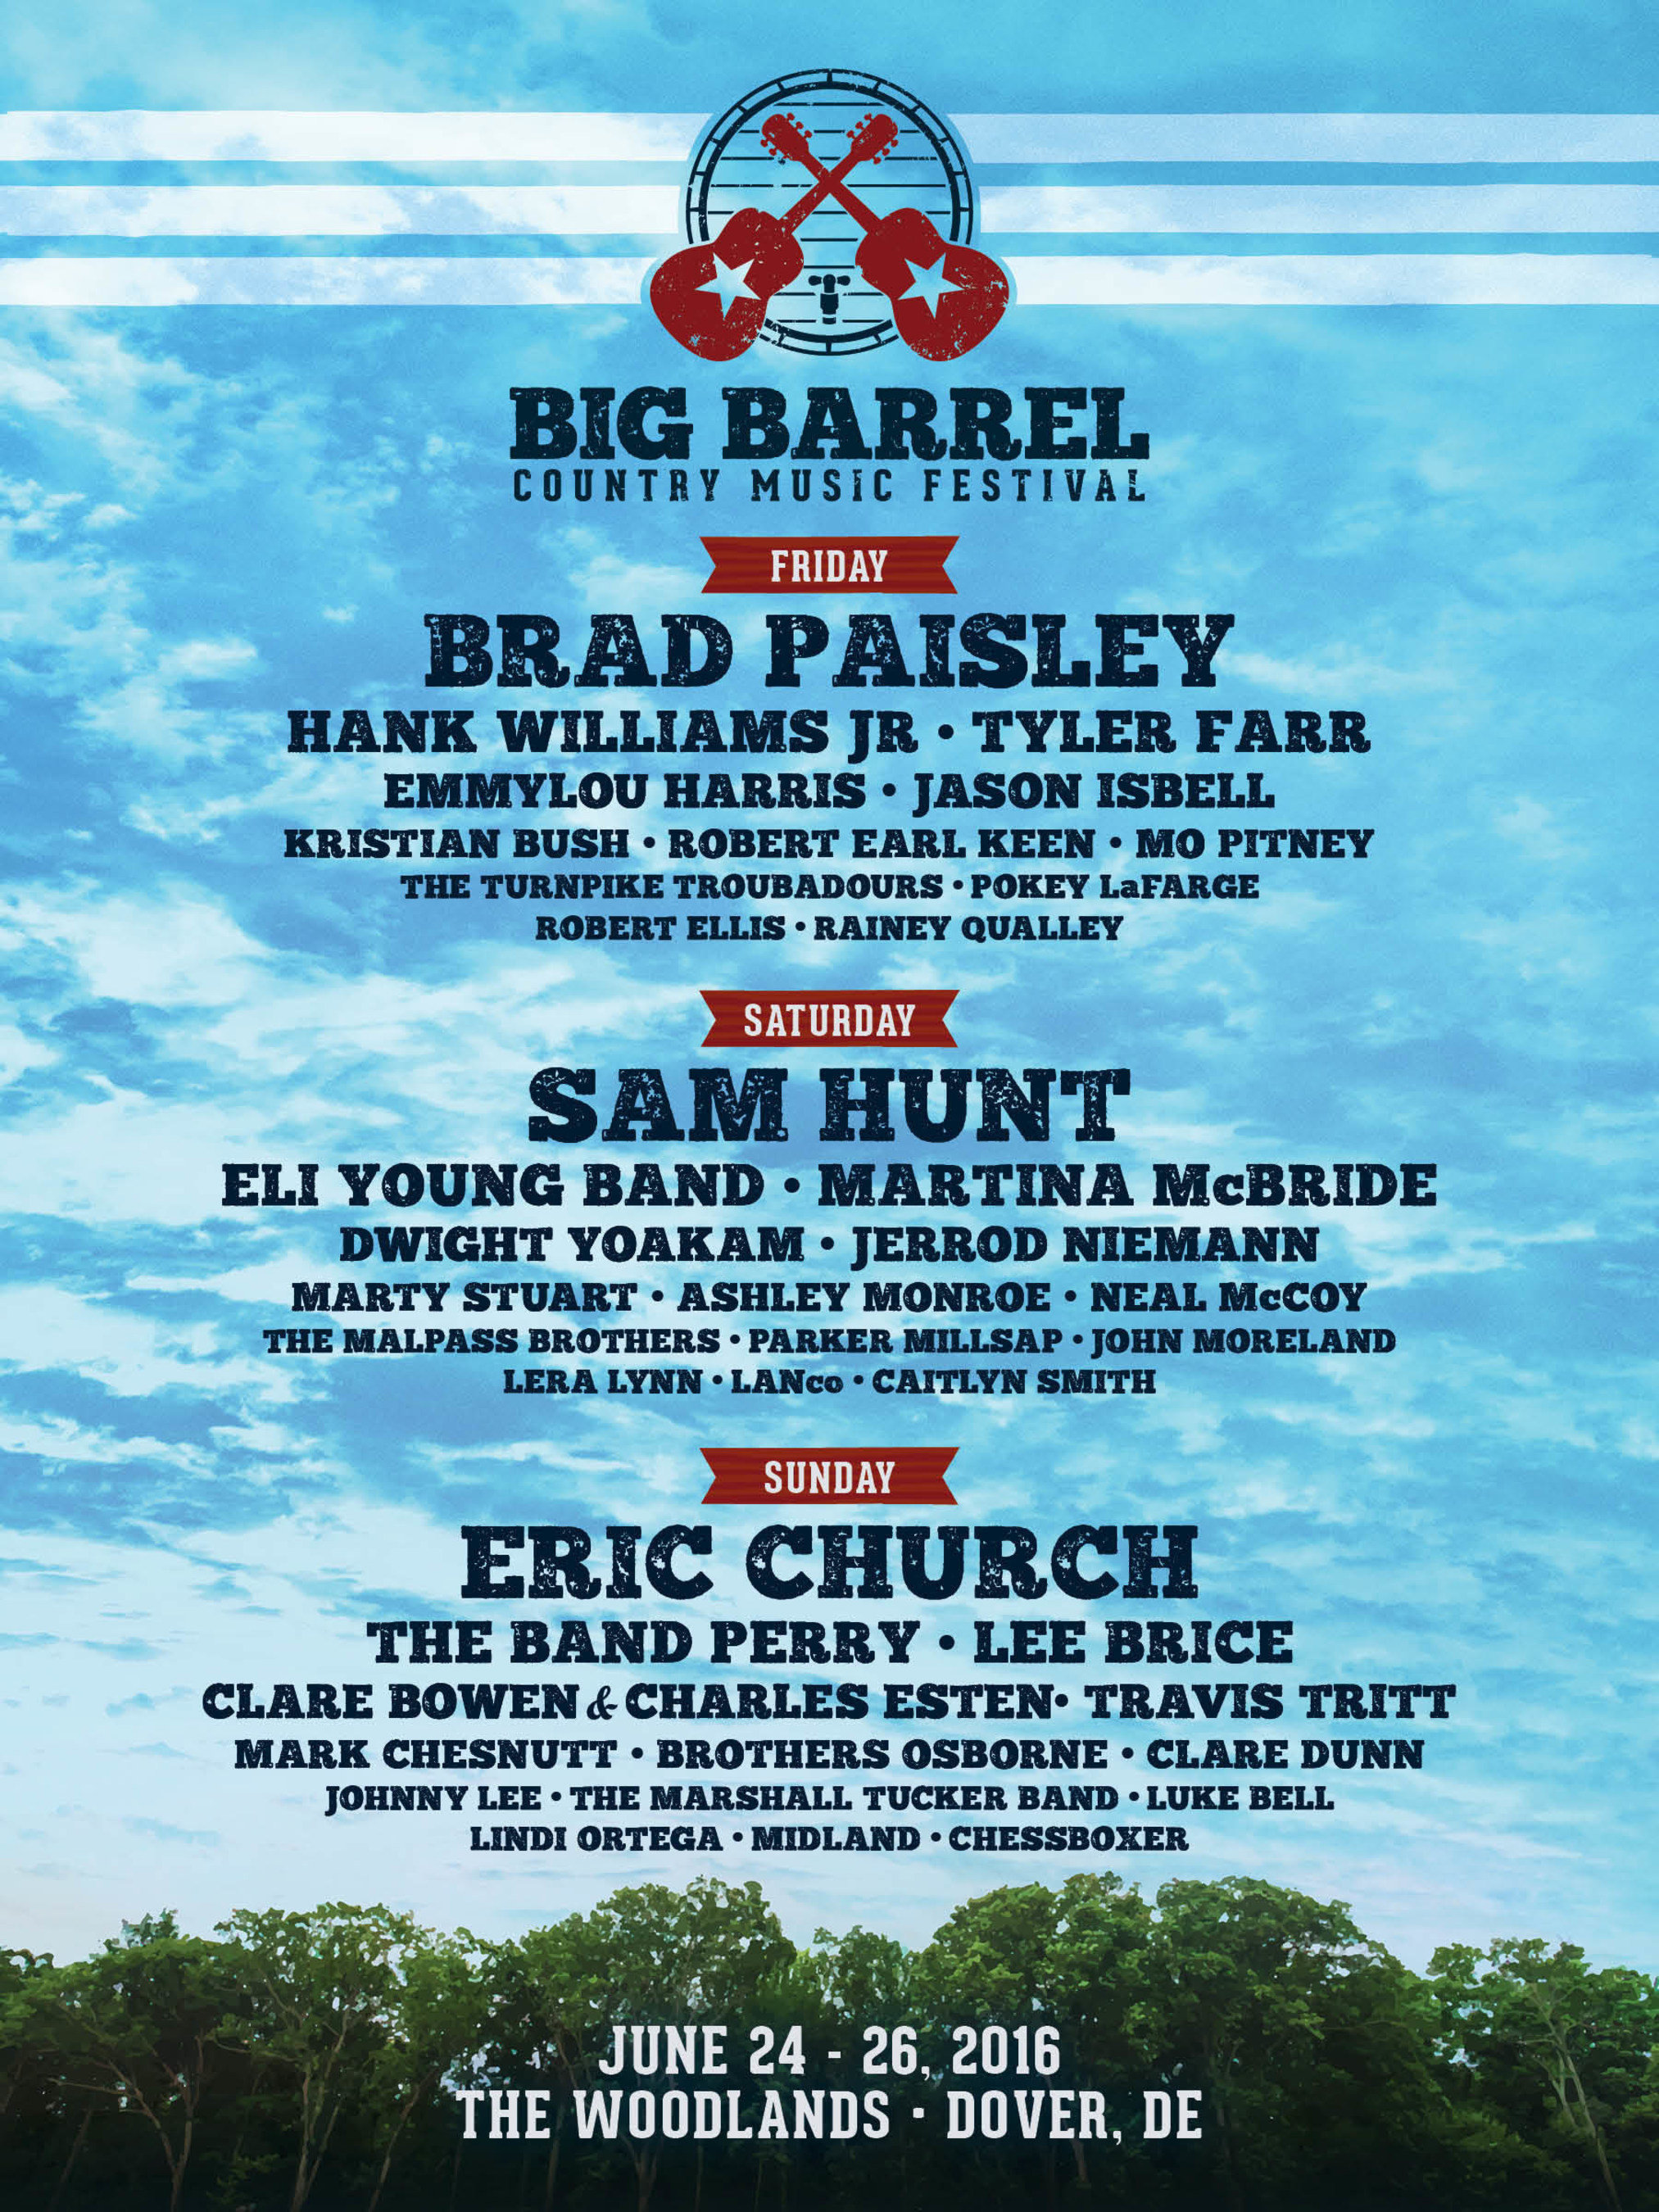 The second annual Big Barrel Country Music Festival will take place June 24 - 26, 2016 at The Woodlands of Dover International Speedway. The lineup features headliners Eric Church, Brad Paisley and Sam Hunt as well as Hank Williams, Jr., Tyler Farr, Eli Young Band, Martina McBride, The Band Perry, Lee Brice and many more.